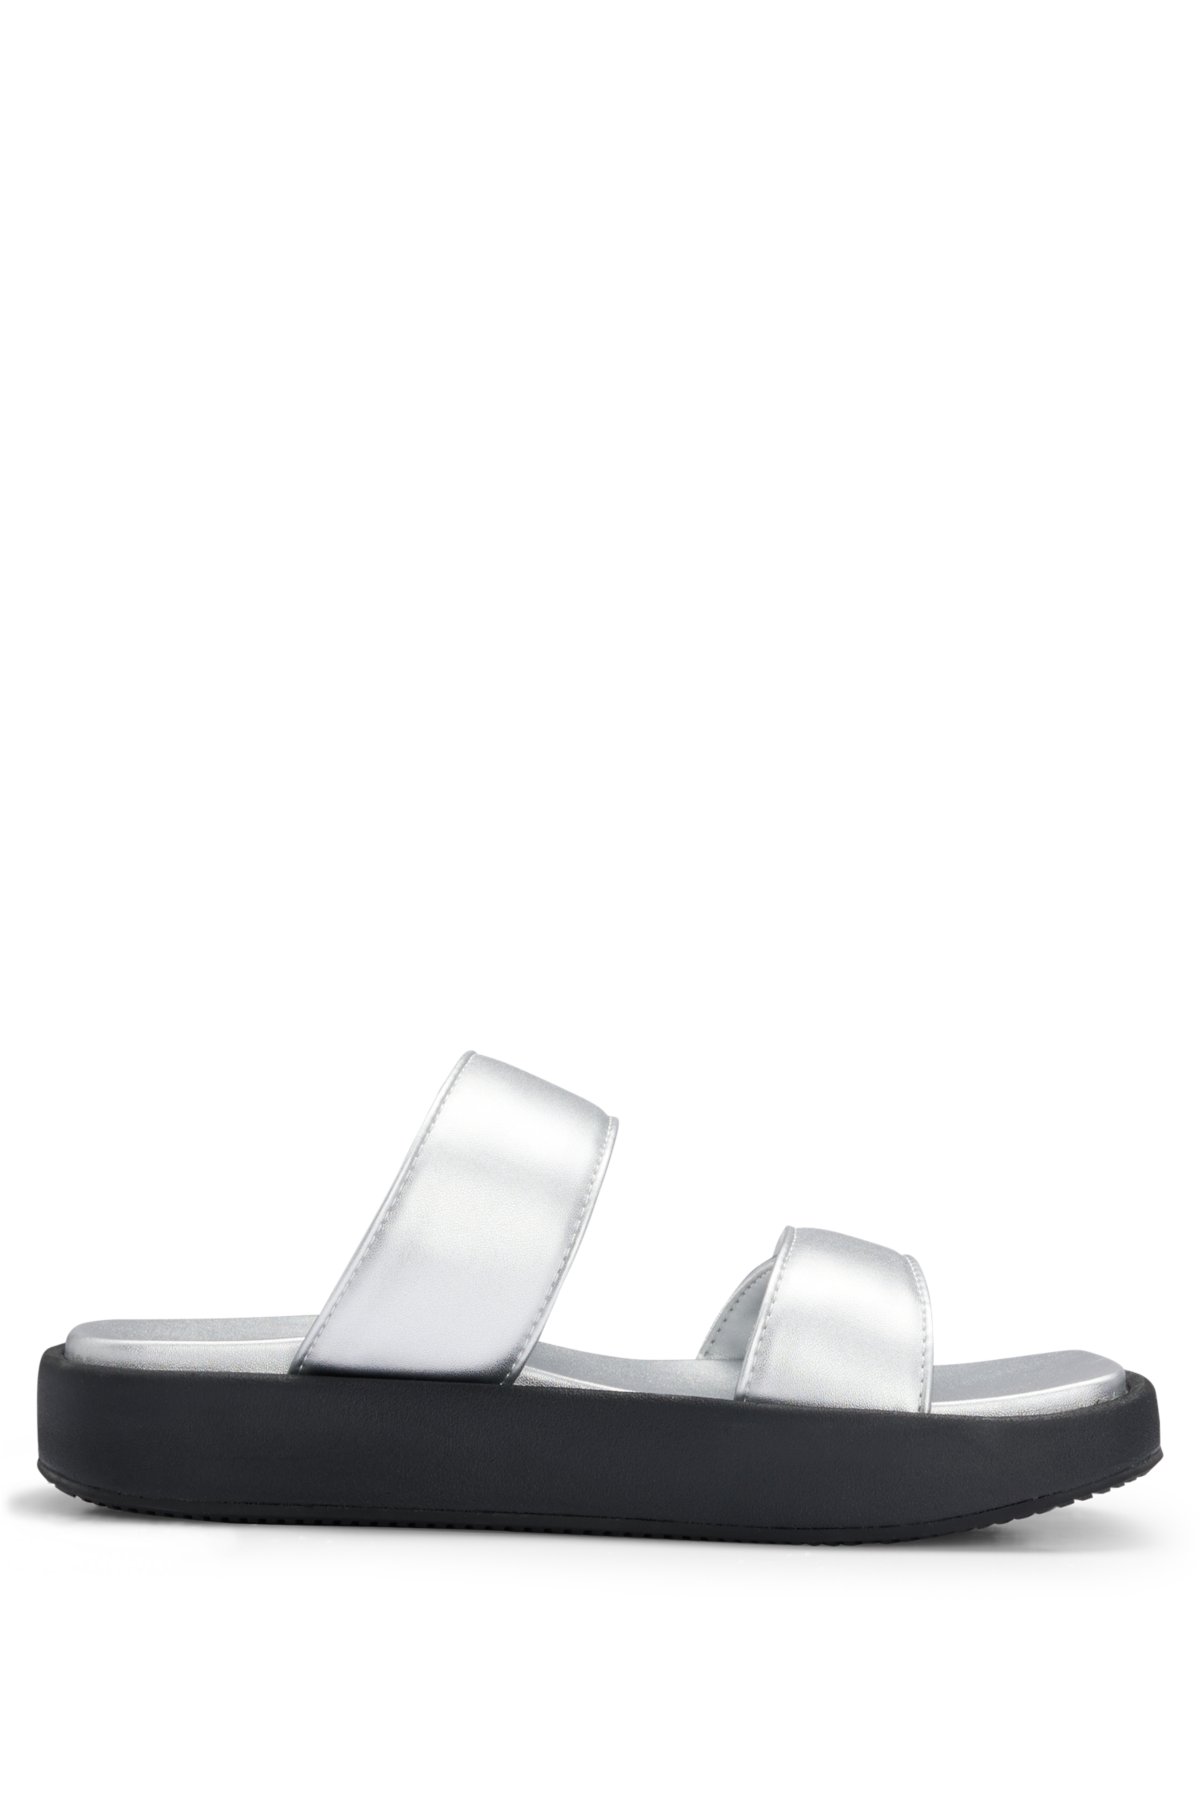 Faux-leather slip-on sandals with padded straps, Silver